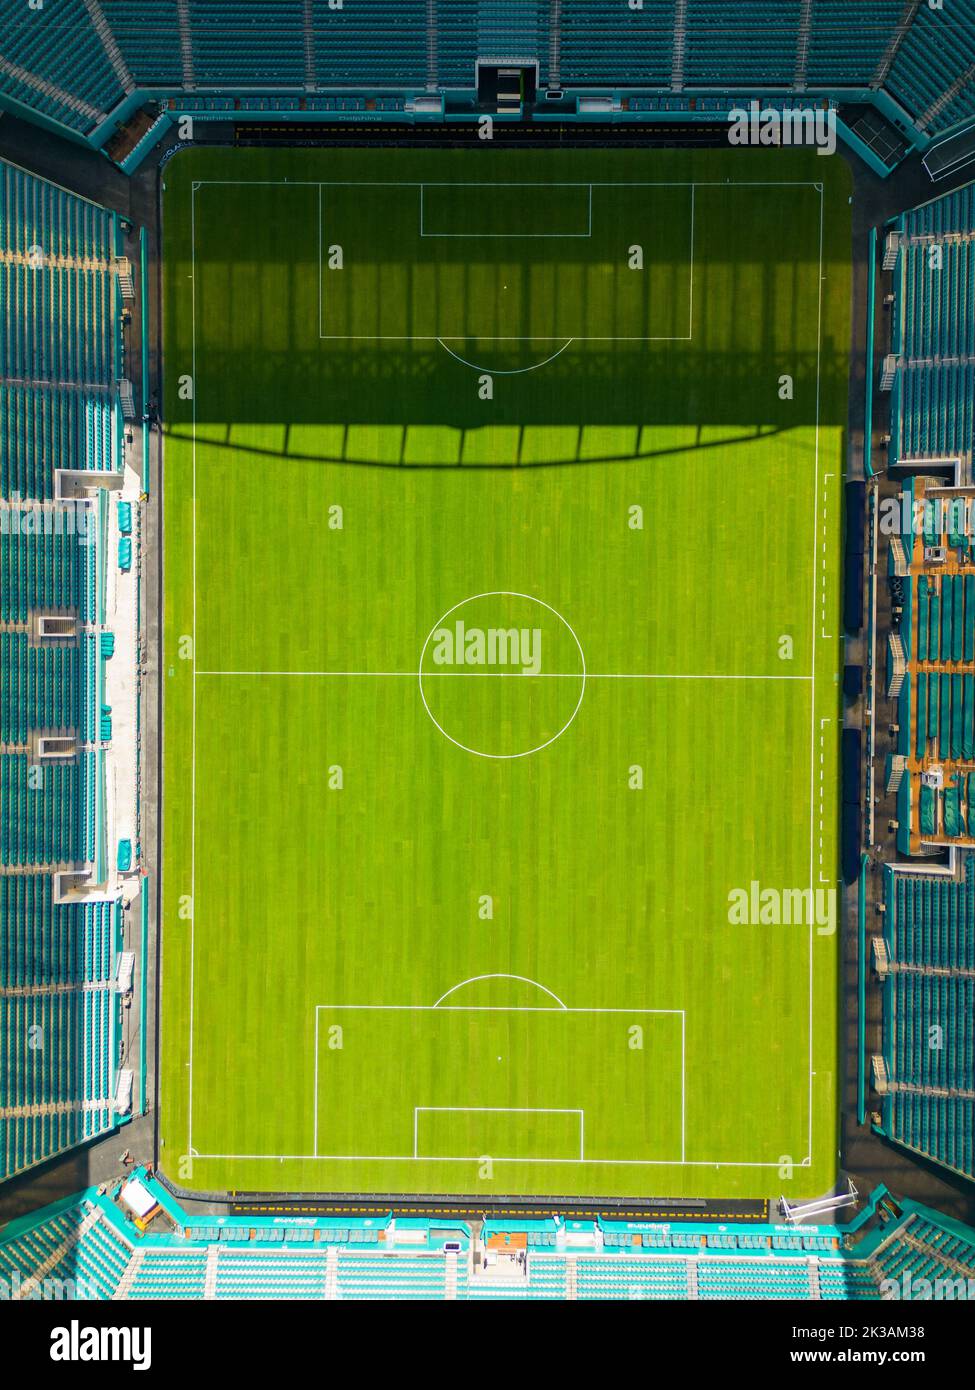 Aerial photo of a soccer sports field stadium Stock Photo